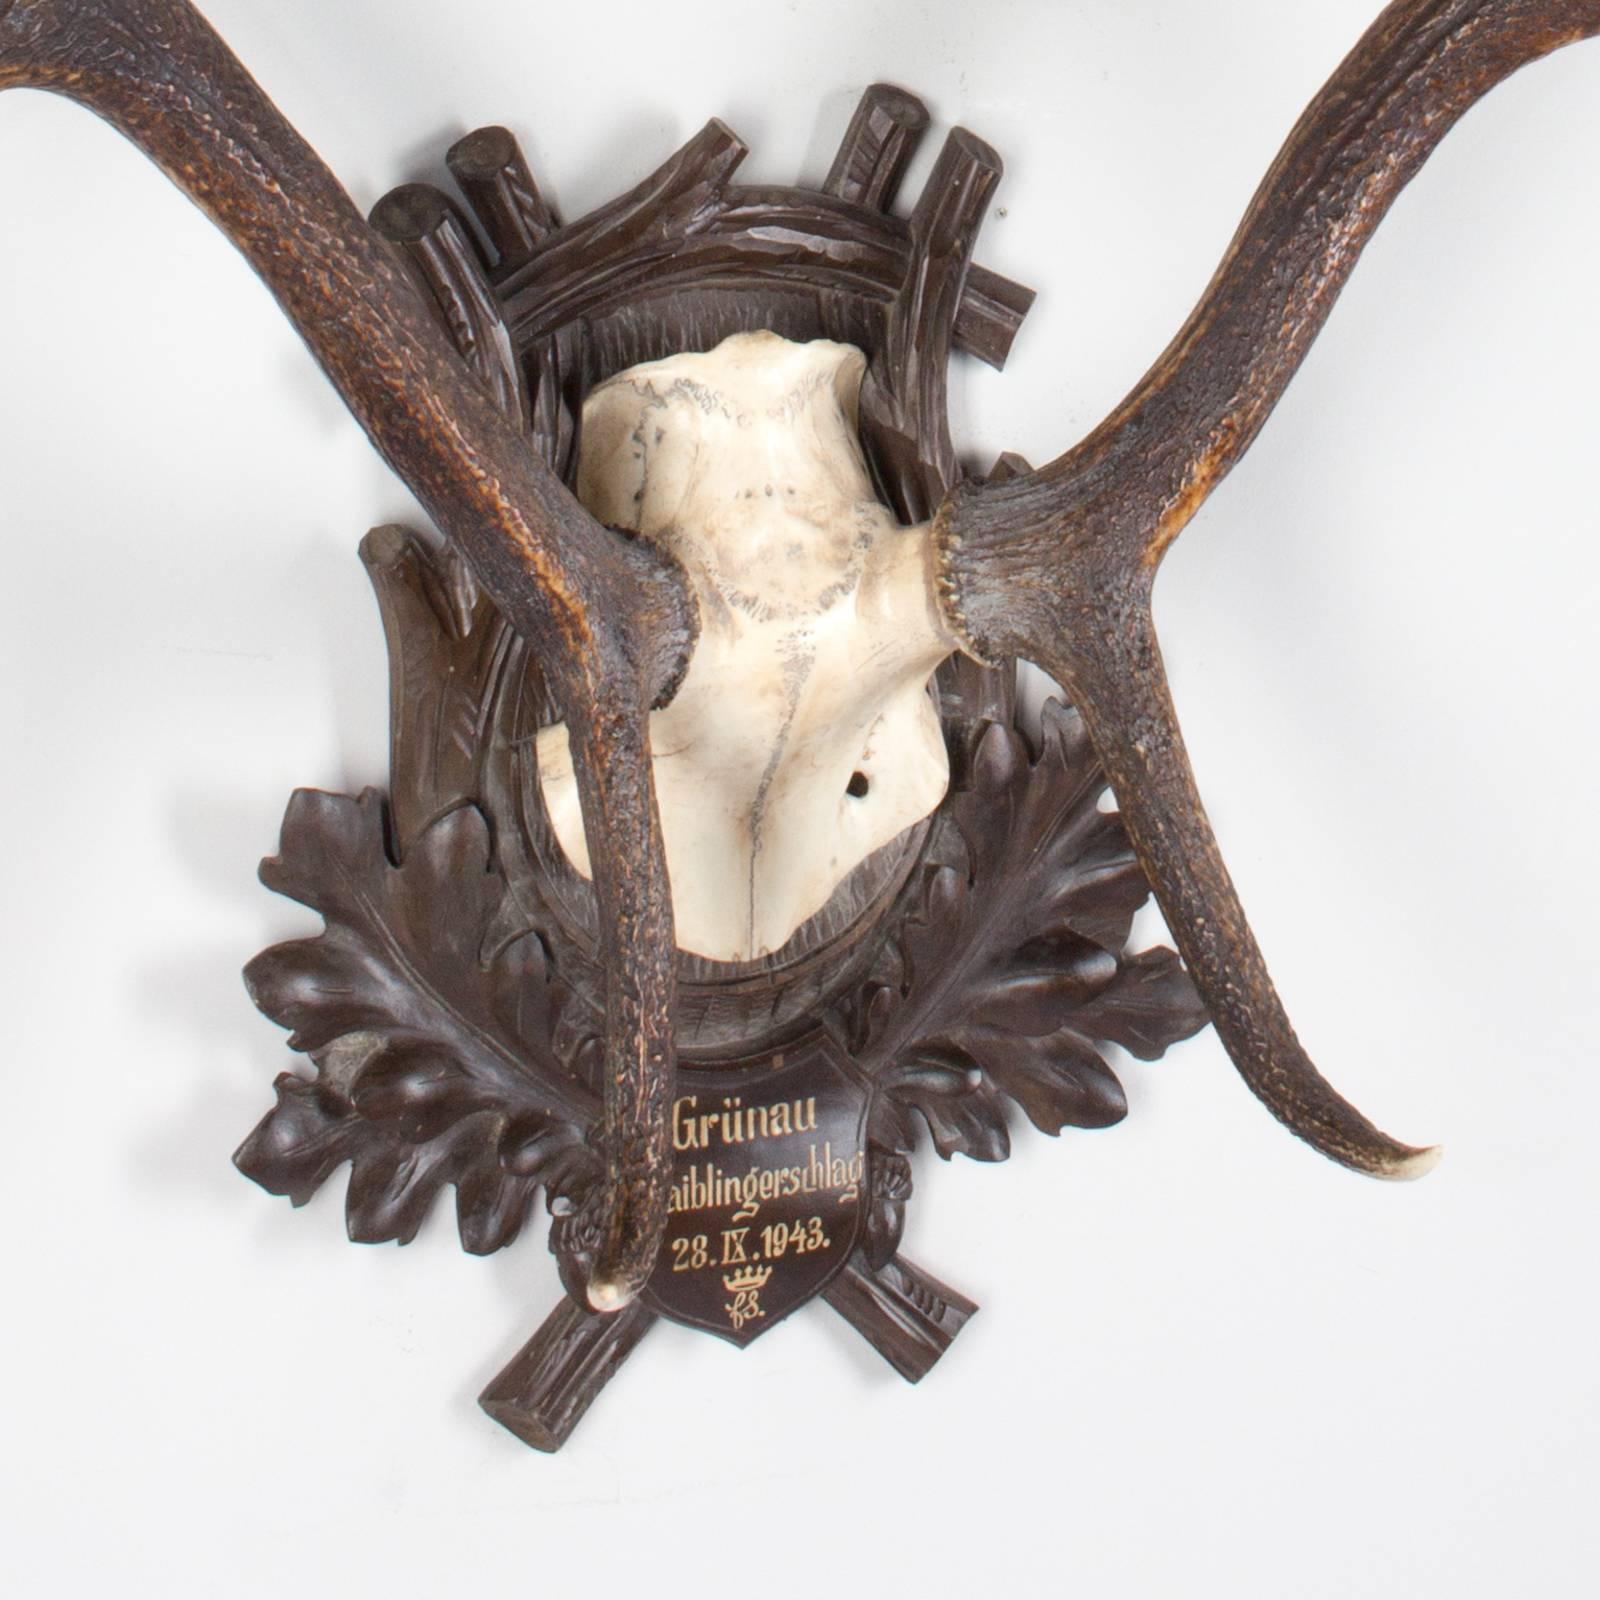 Mid-20th Century 1940s German Red Stag Trophy on Black Forest Plaque from Grünau Valley Austria